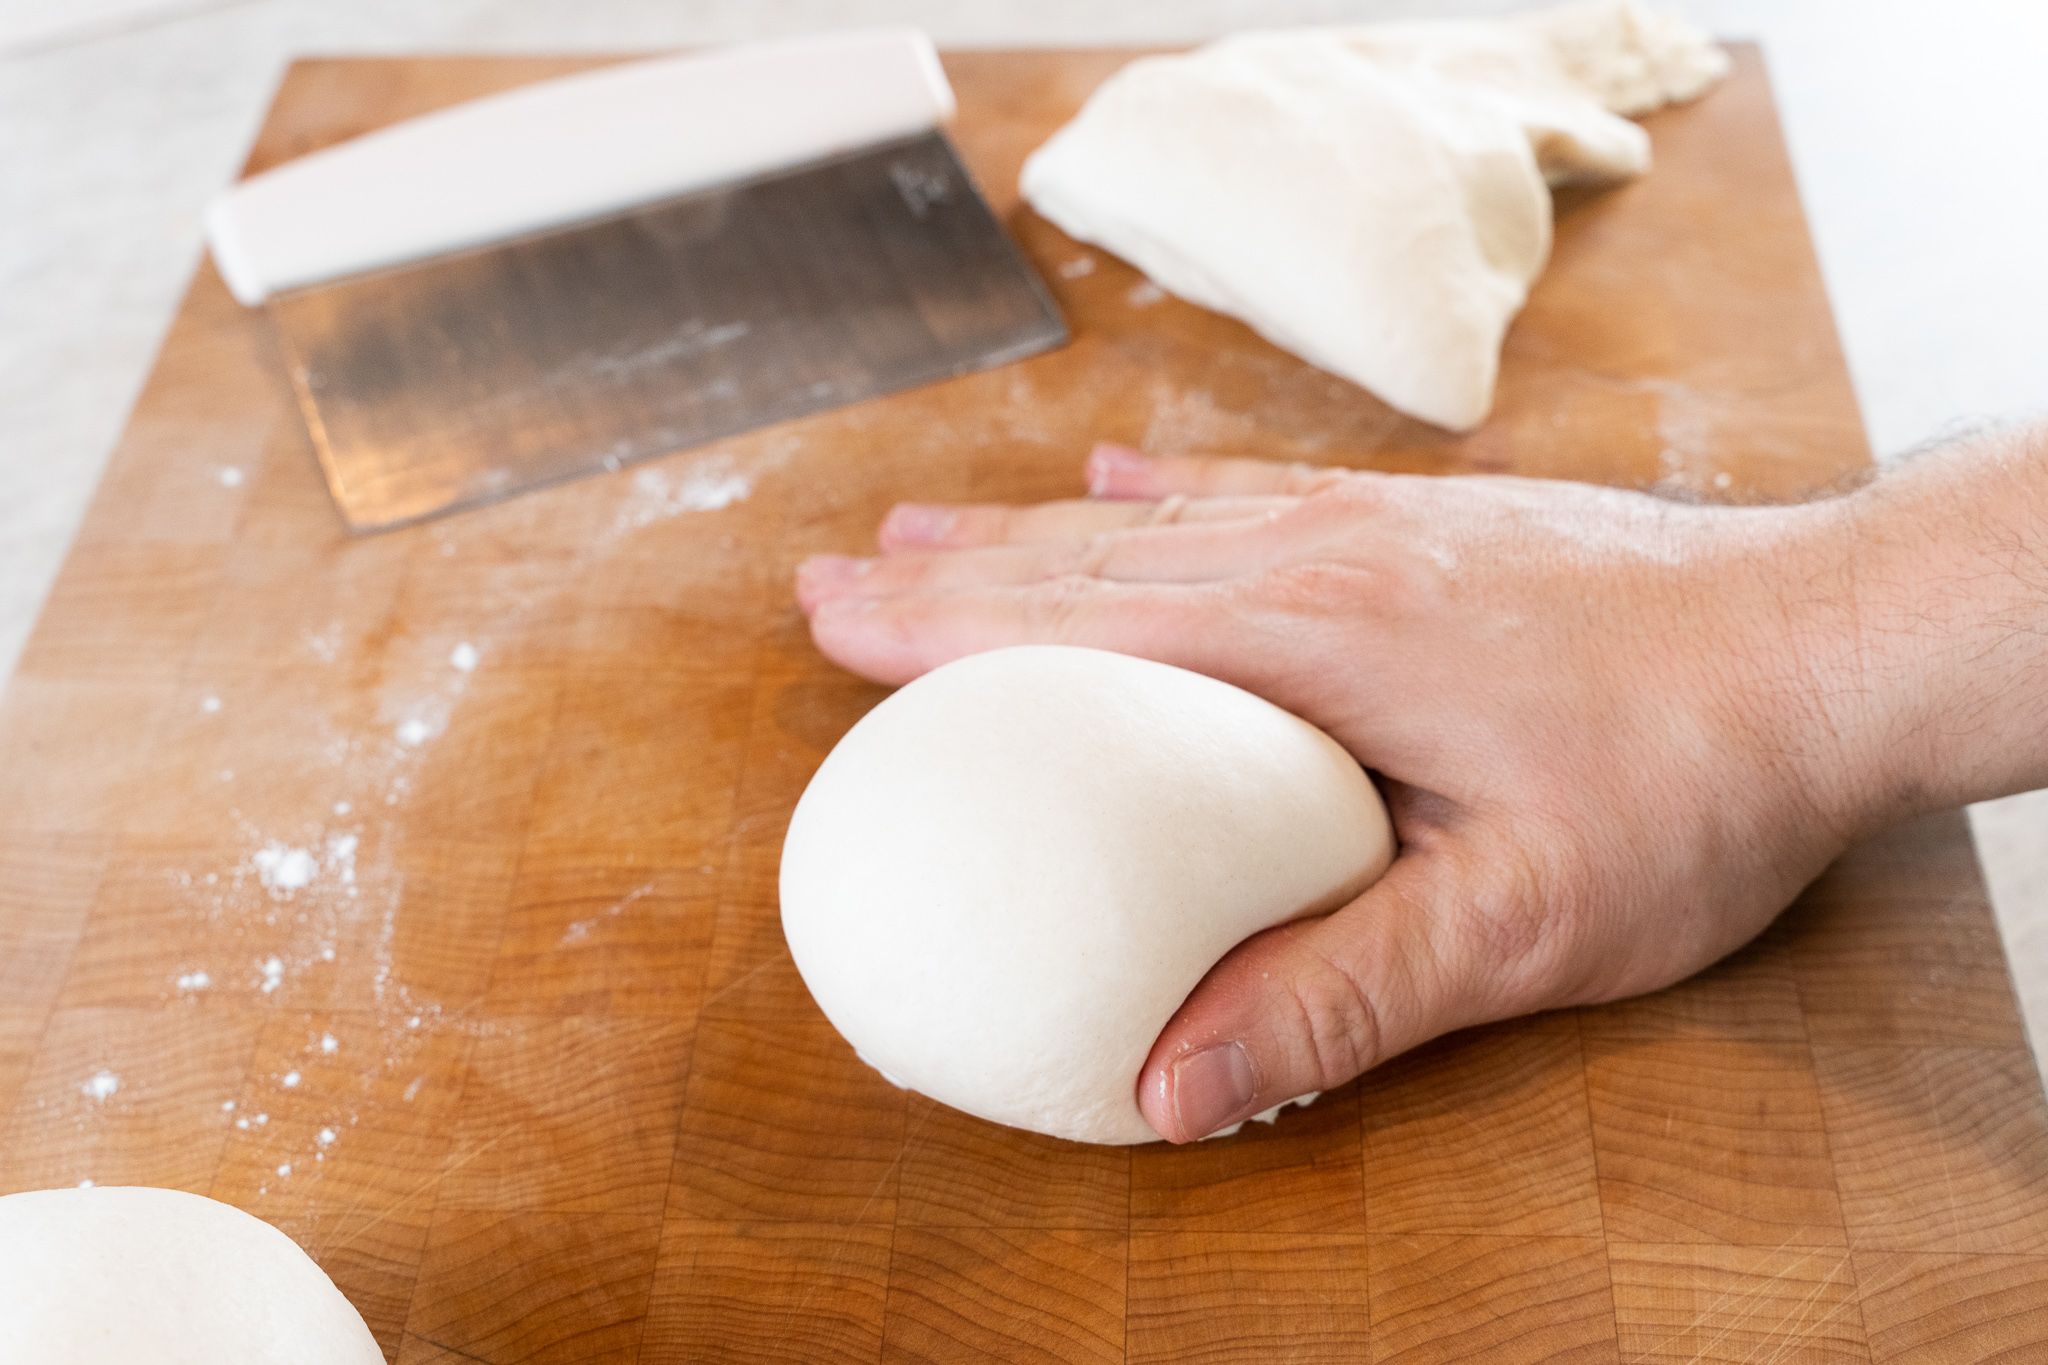 For Your Next Pizza Dough, Try Lard